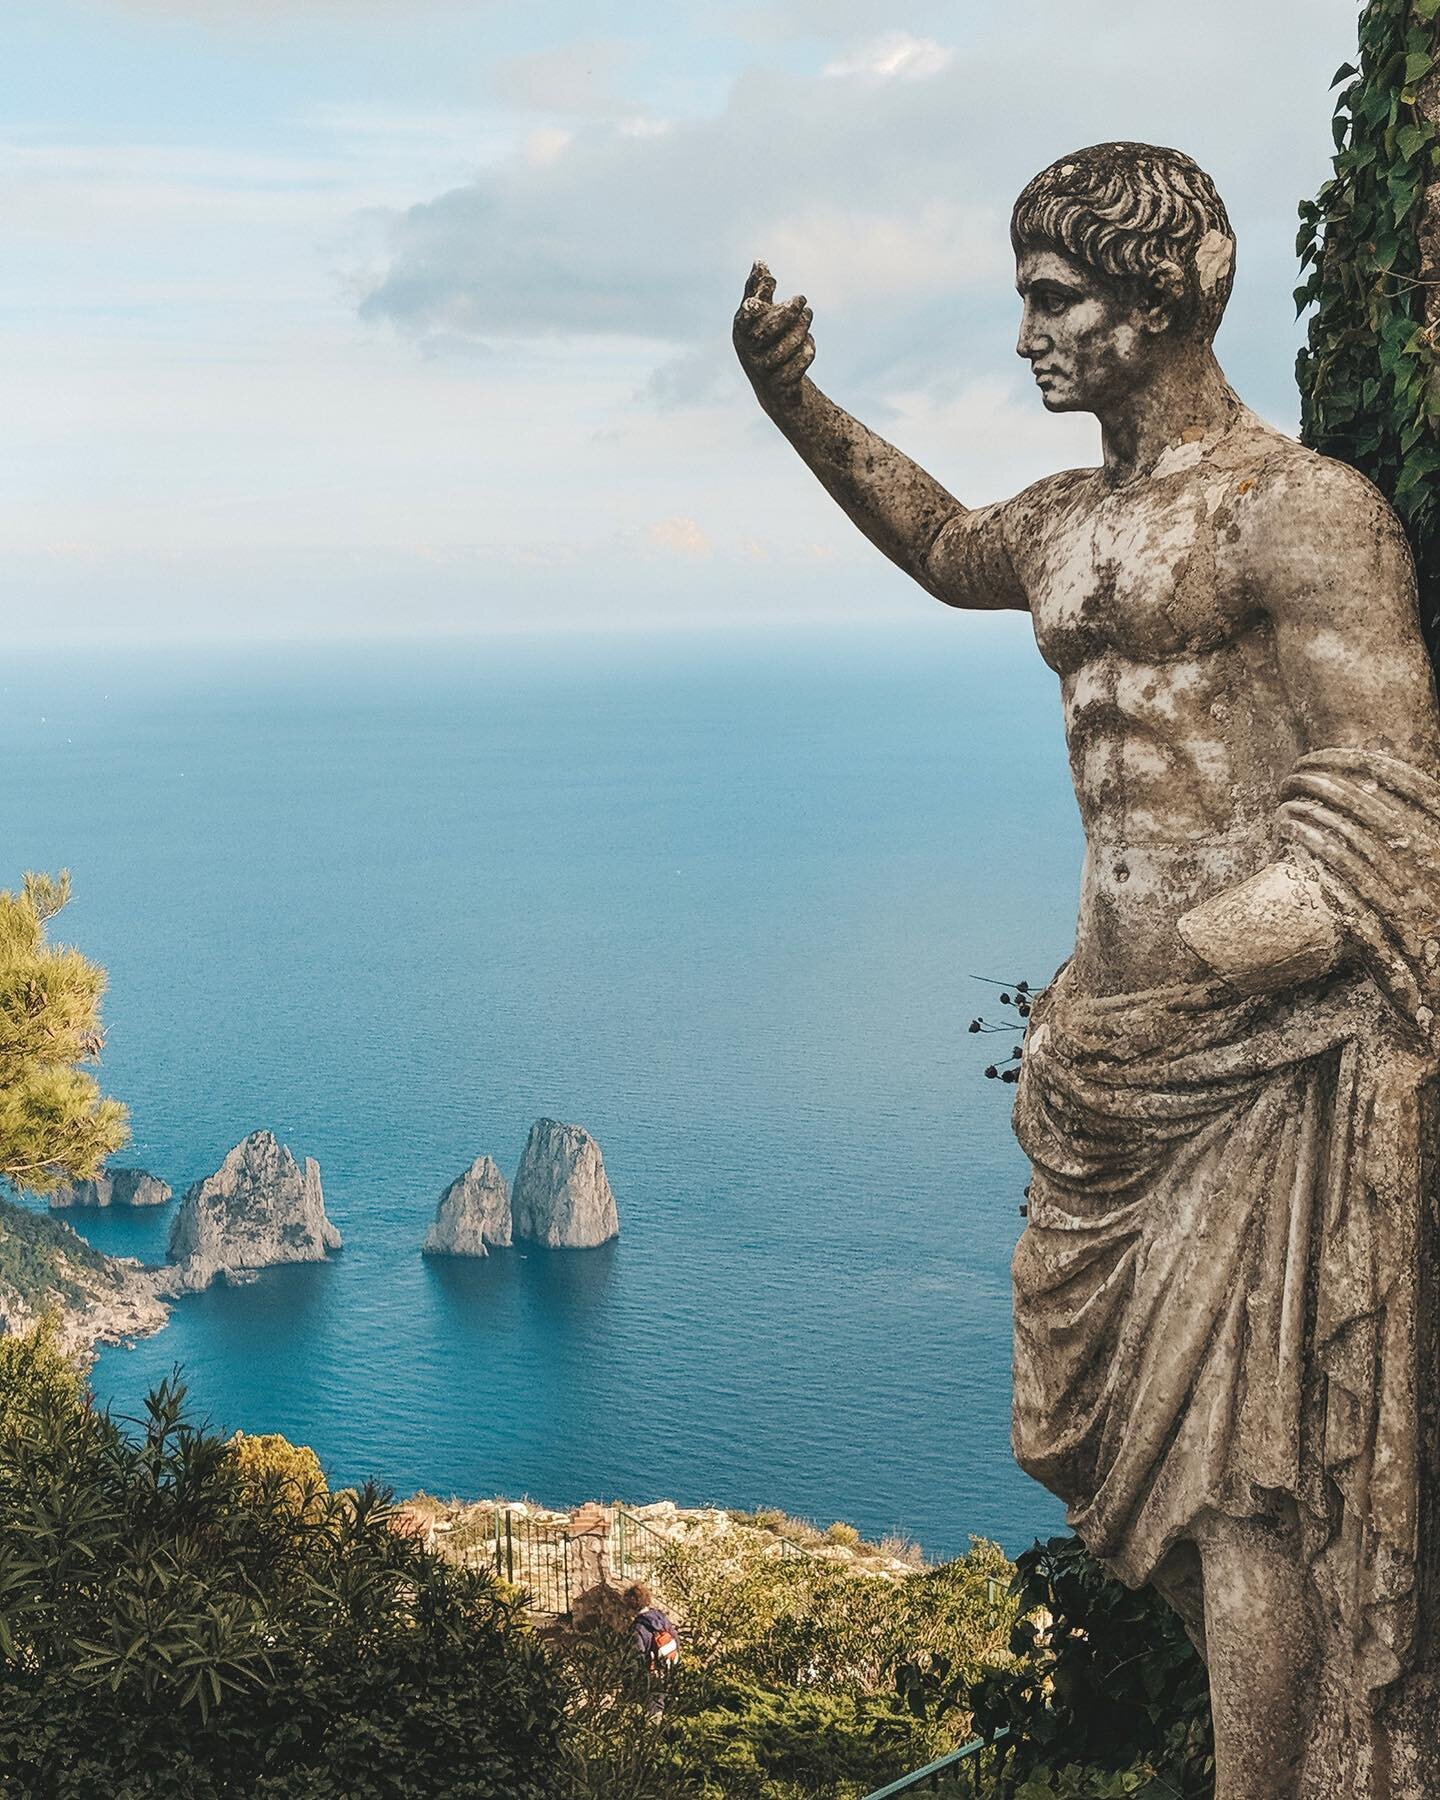 &quot;You do not travel if you are afraid of the unknown, you travel for the unknown, that reveals you with yourself.&quot;
Ella Maillart
*
*
*
#visitcapri #seaview #islandvibes #capriisland #southernitaly #destination_italy #amazingplaces #amalficoa